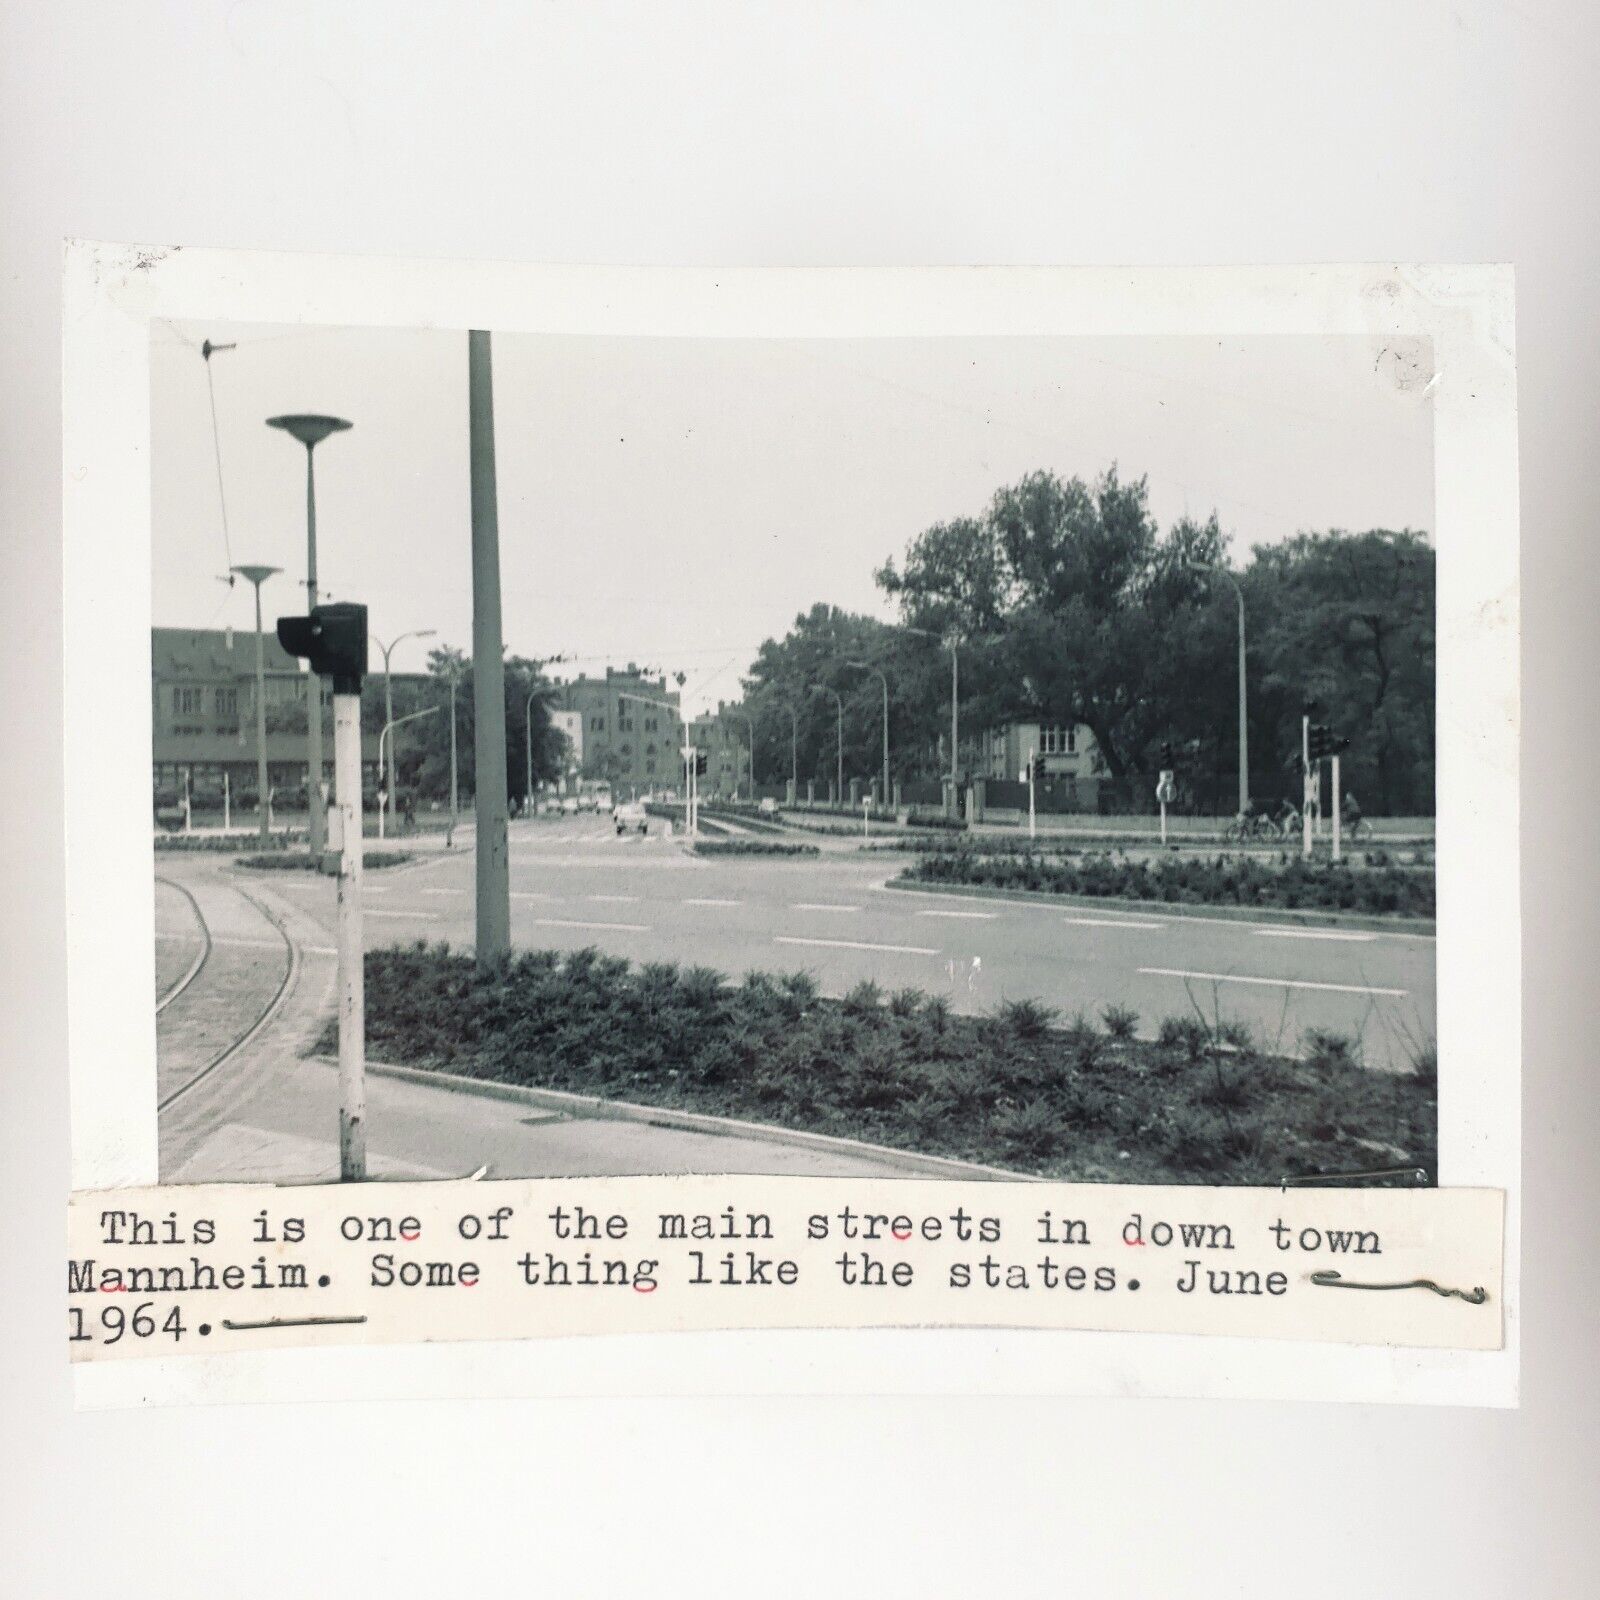 Downtown Mannheim Street Germany Photo 1960s Army Soldier Road Snapshot A3960